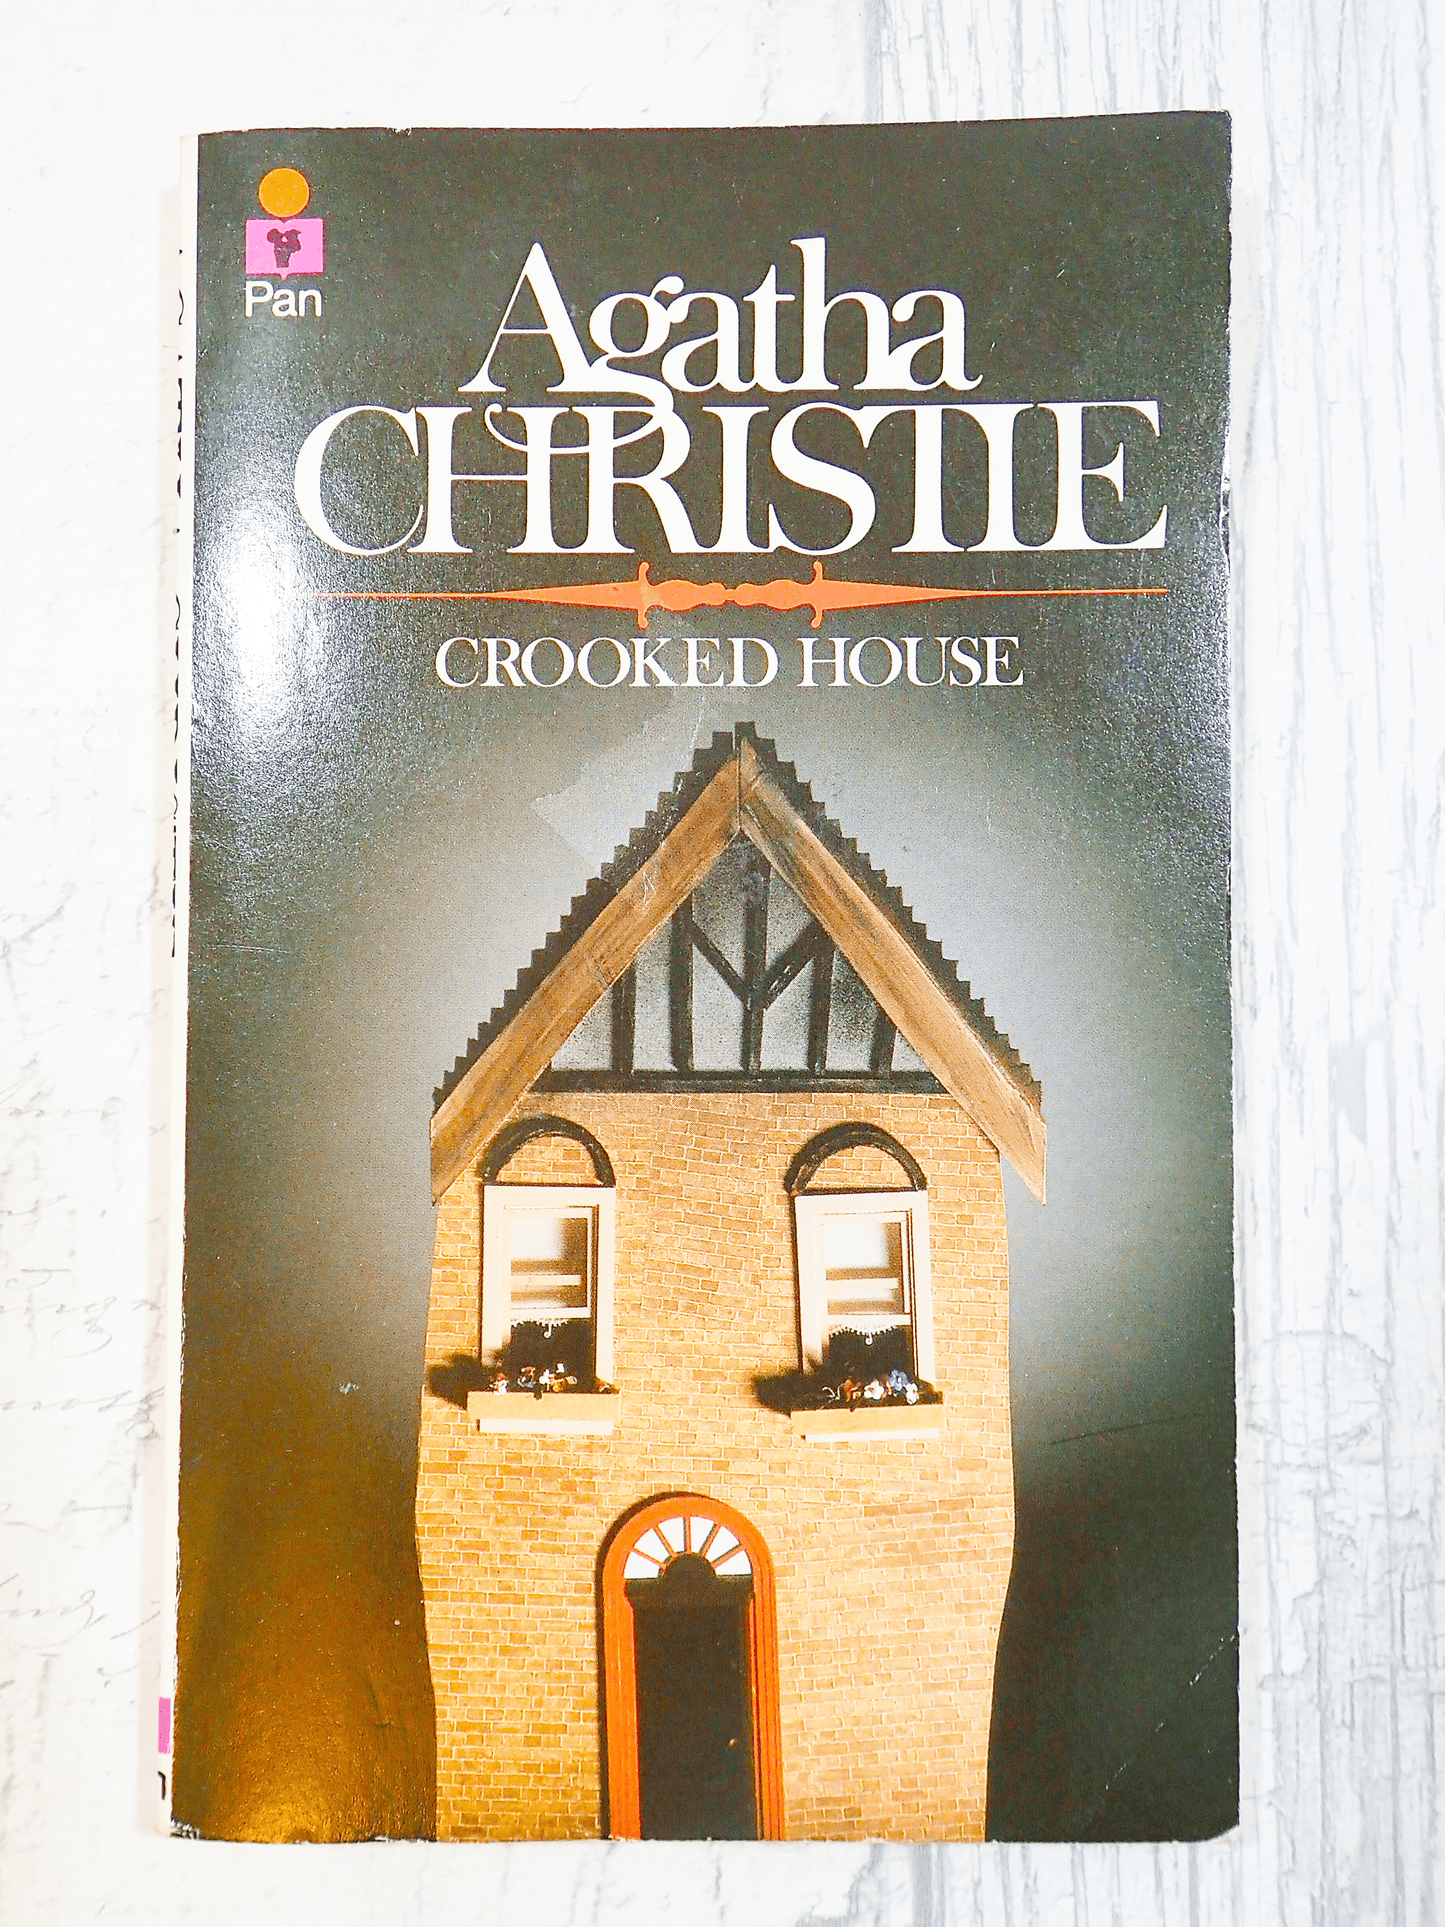 Front cover of Vintage Pan Paperback Agatha Christie 'Crooked House' showing a charming crooked red brick house against a light background. 